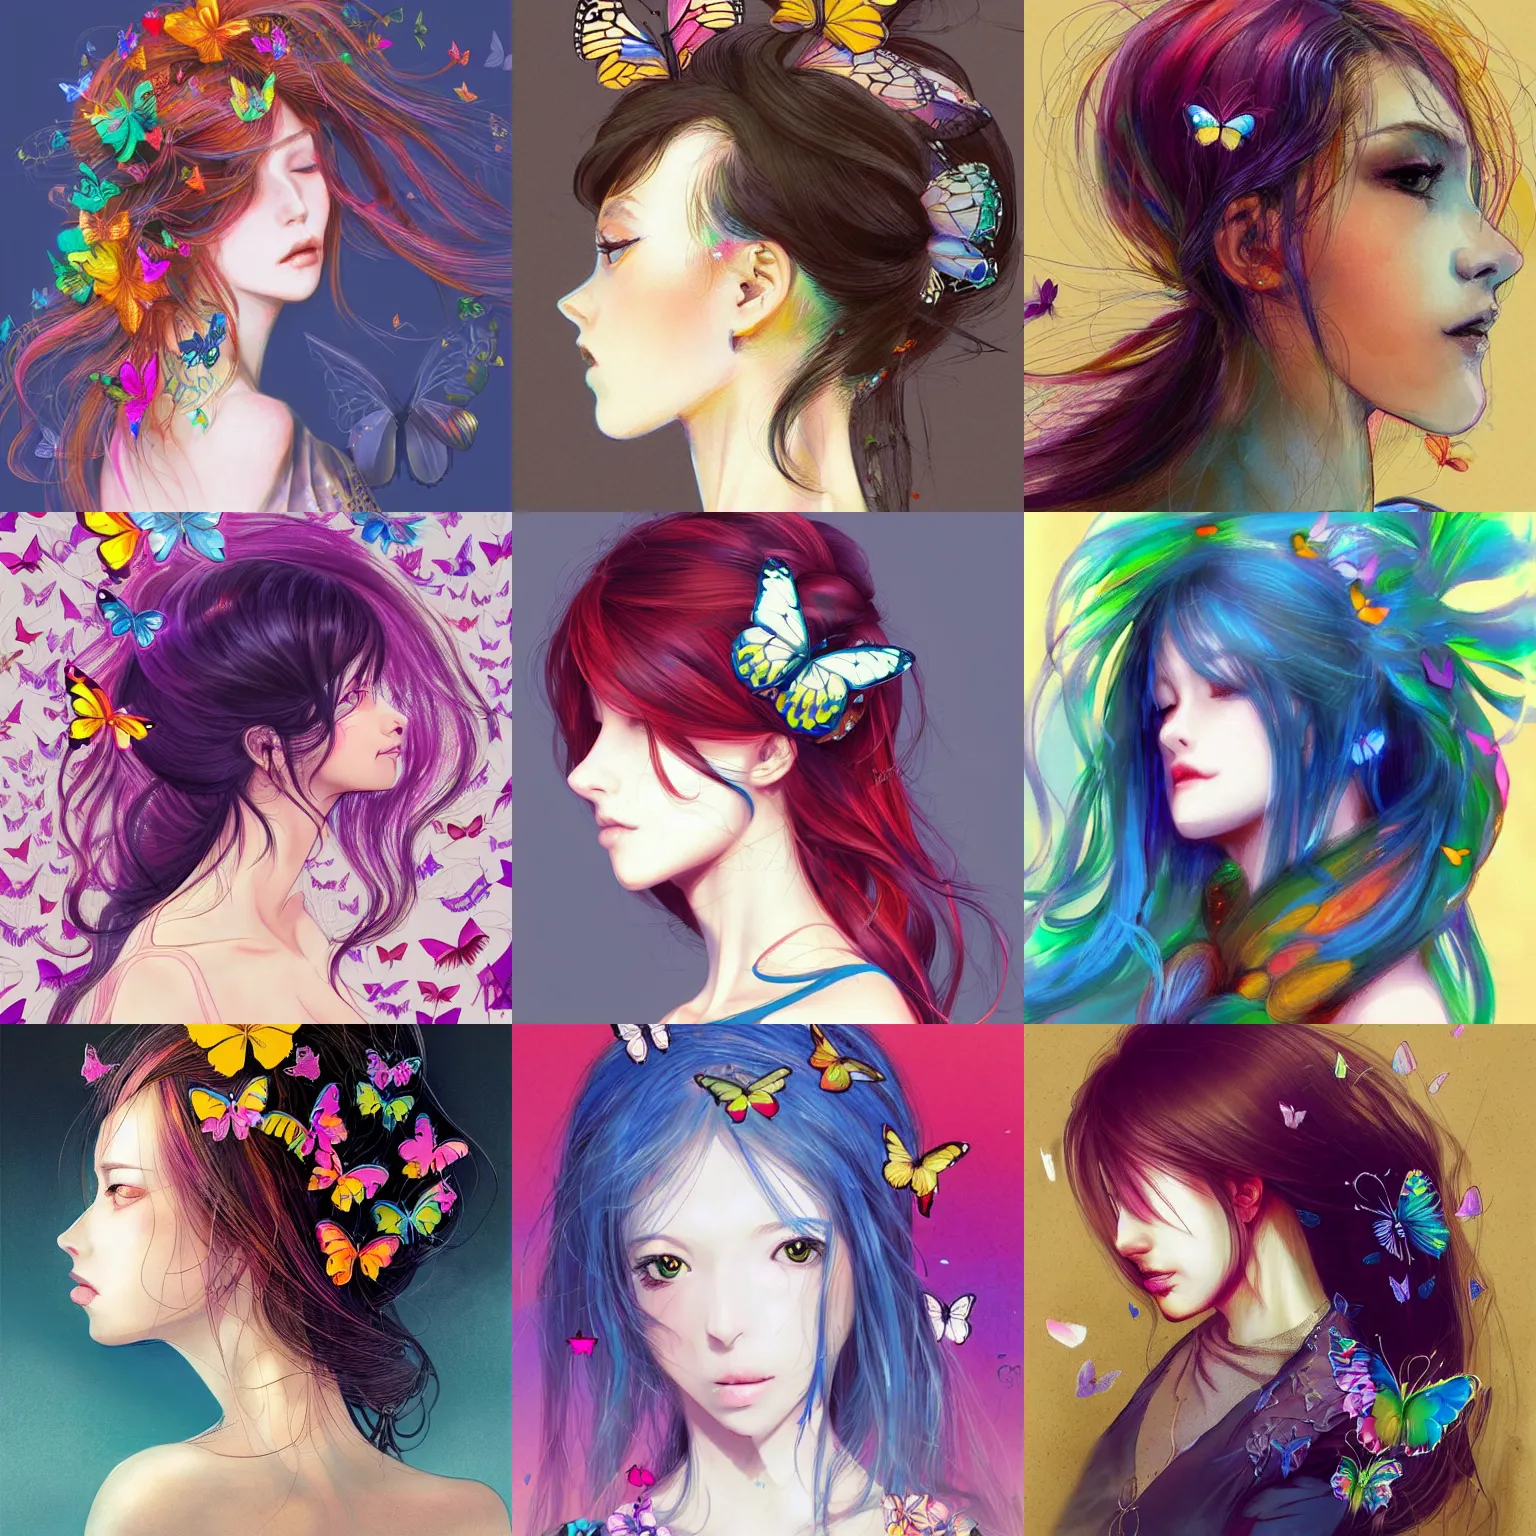 Prompt: A beautiful side portrait illustration of a woman. Colorful butterflies emerge from her hair, covering almost all of her head. Art by Yoshitaka Amano, trending on Artstation.